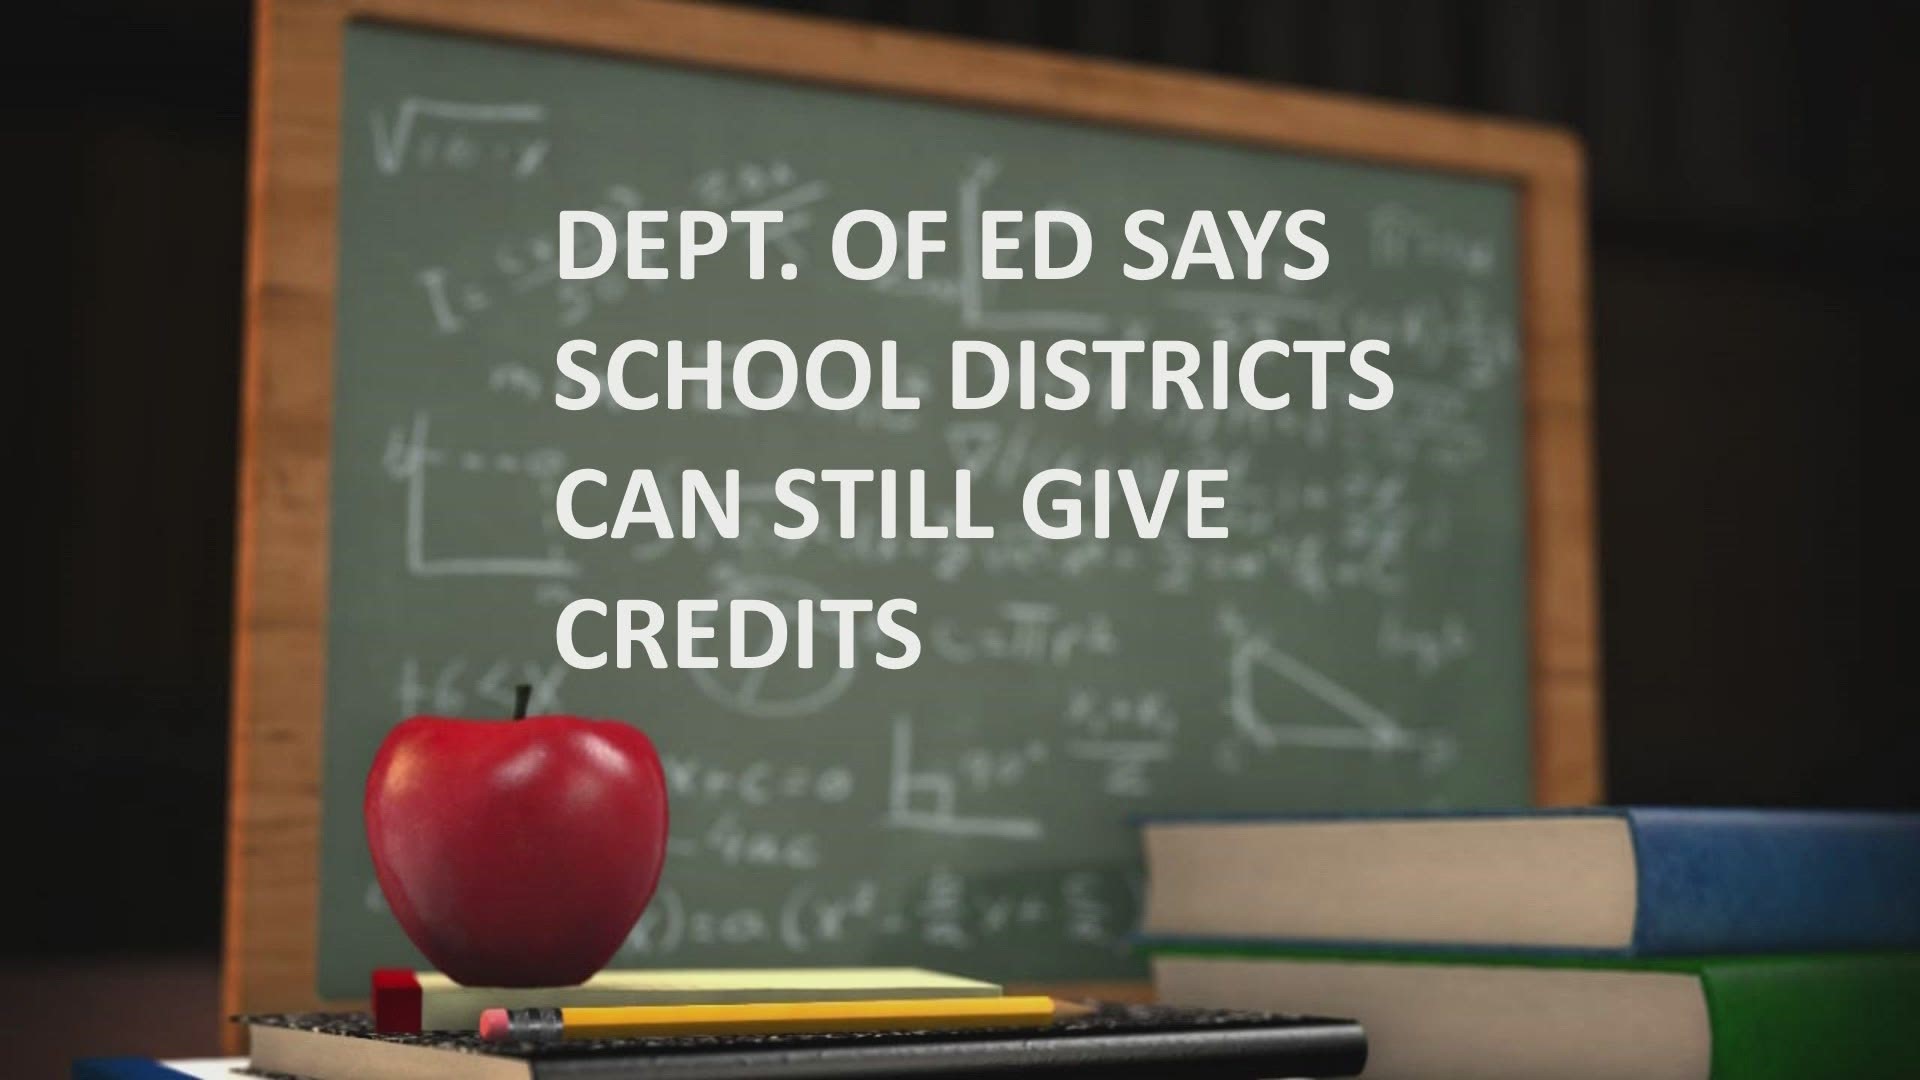 The Iowa Department of Education told Local 5 that DMPS students will be able to graduate so long as they get credit from the school for their classes.